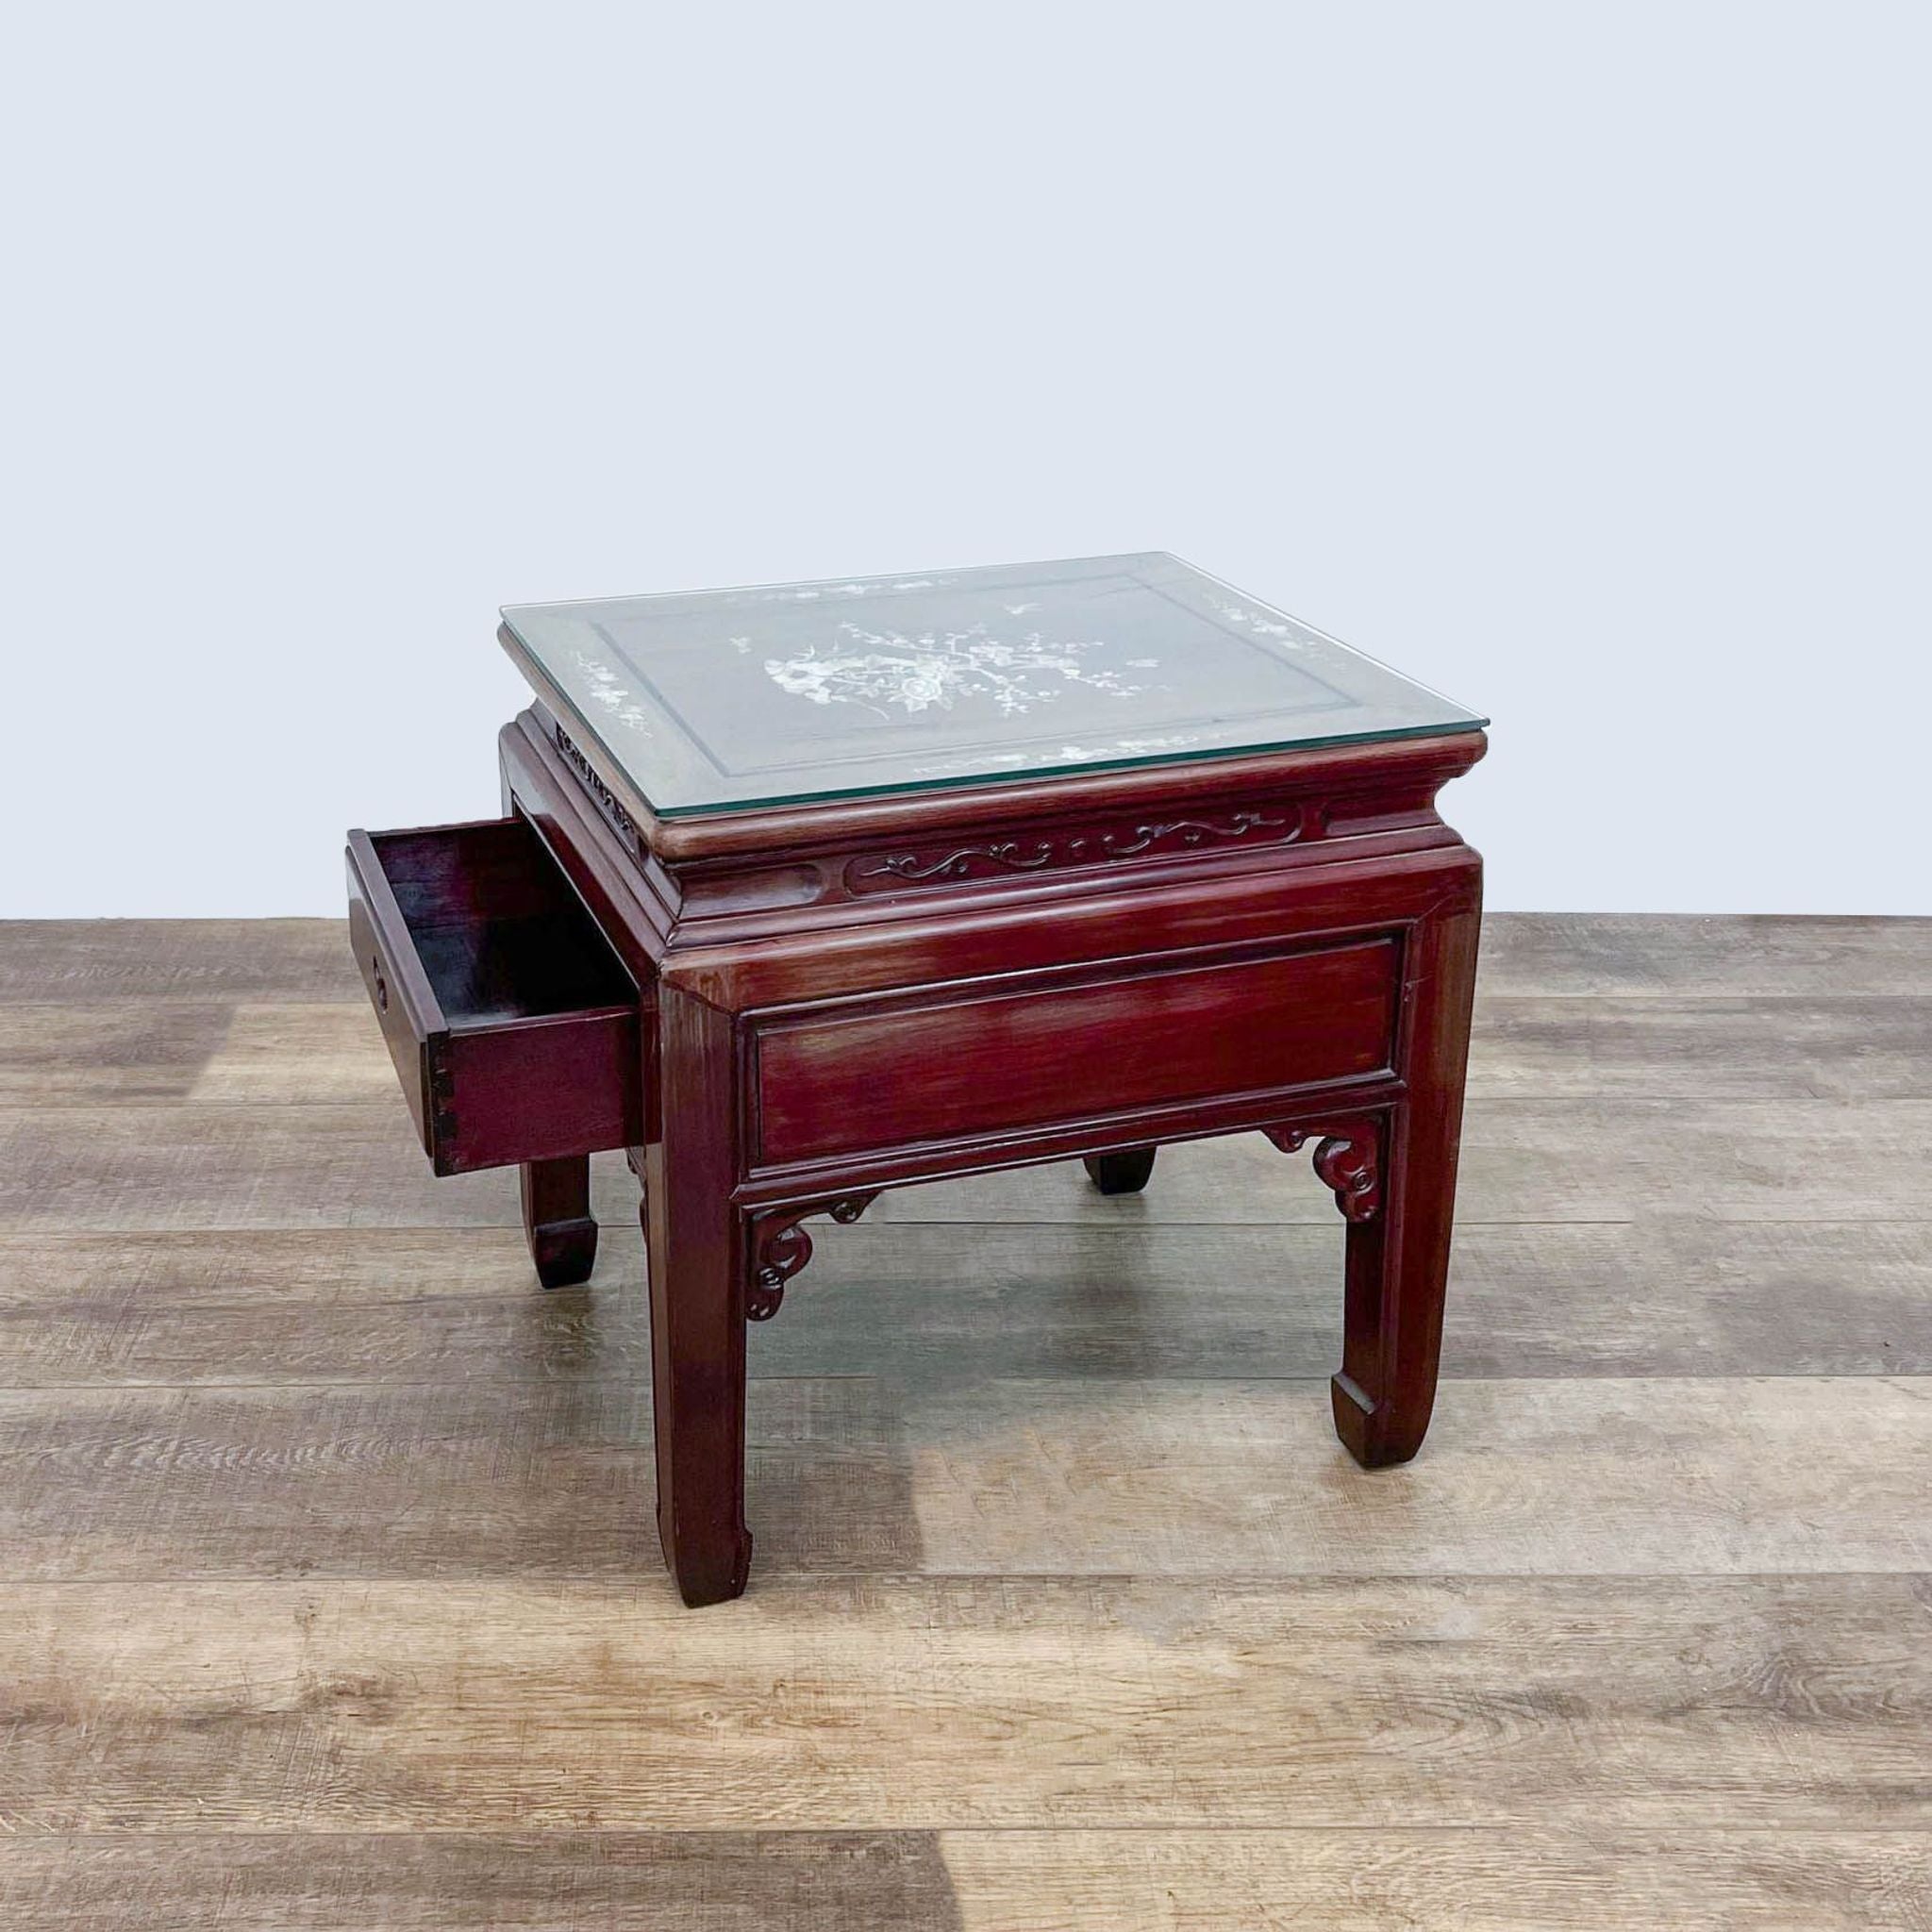 Wooden end table by Reperch with glass top revealing Mother of Pearl inlay, shown with a pull-out drawer extended.